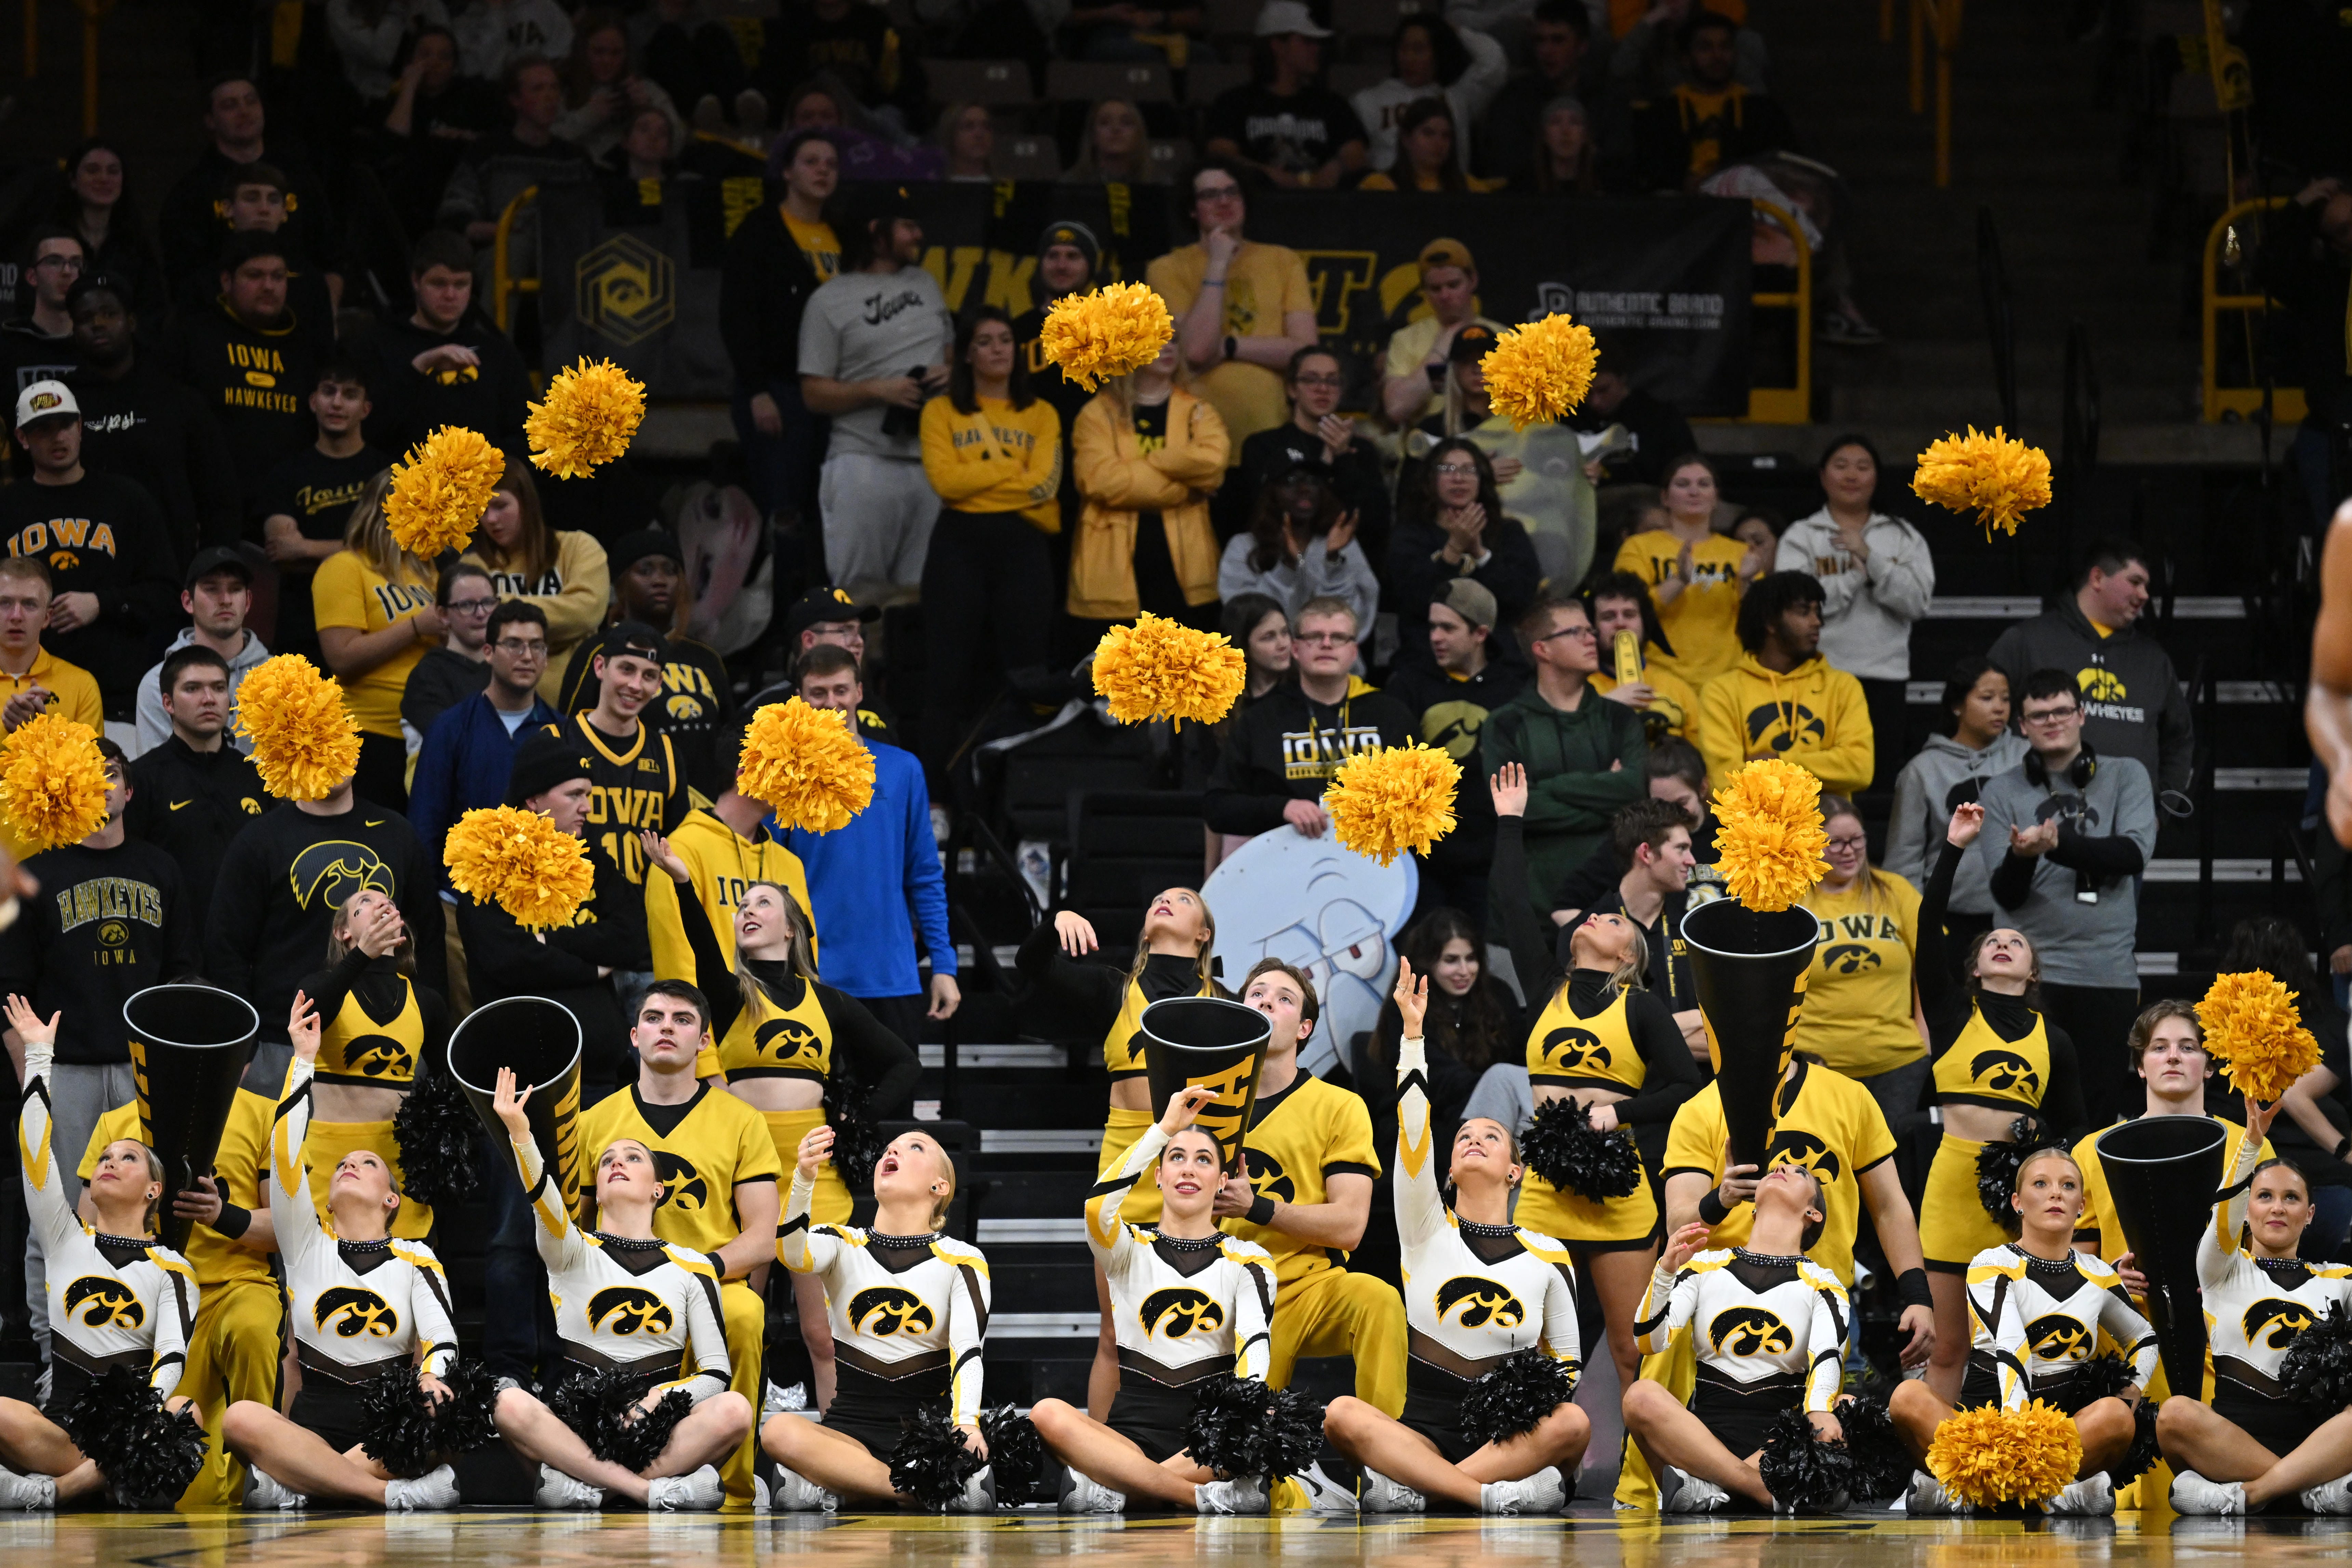 Iowa Hawkeyes cheerleaders react during the game against the Georgia Tech Yellow Jackets during the second half of an NCAA college basketball game, Tuesday, Nov. 29, 2022, in Iowa City, Iowa.